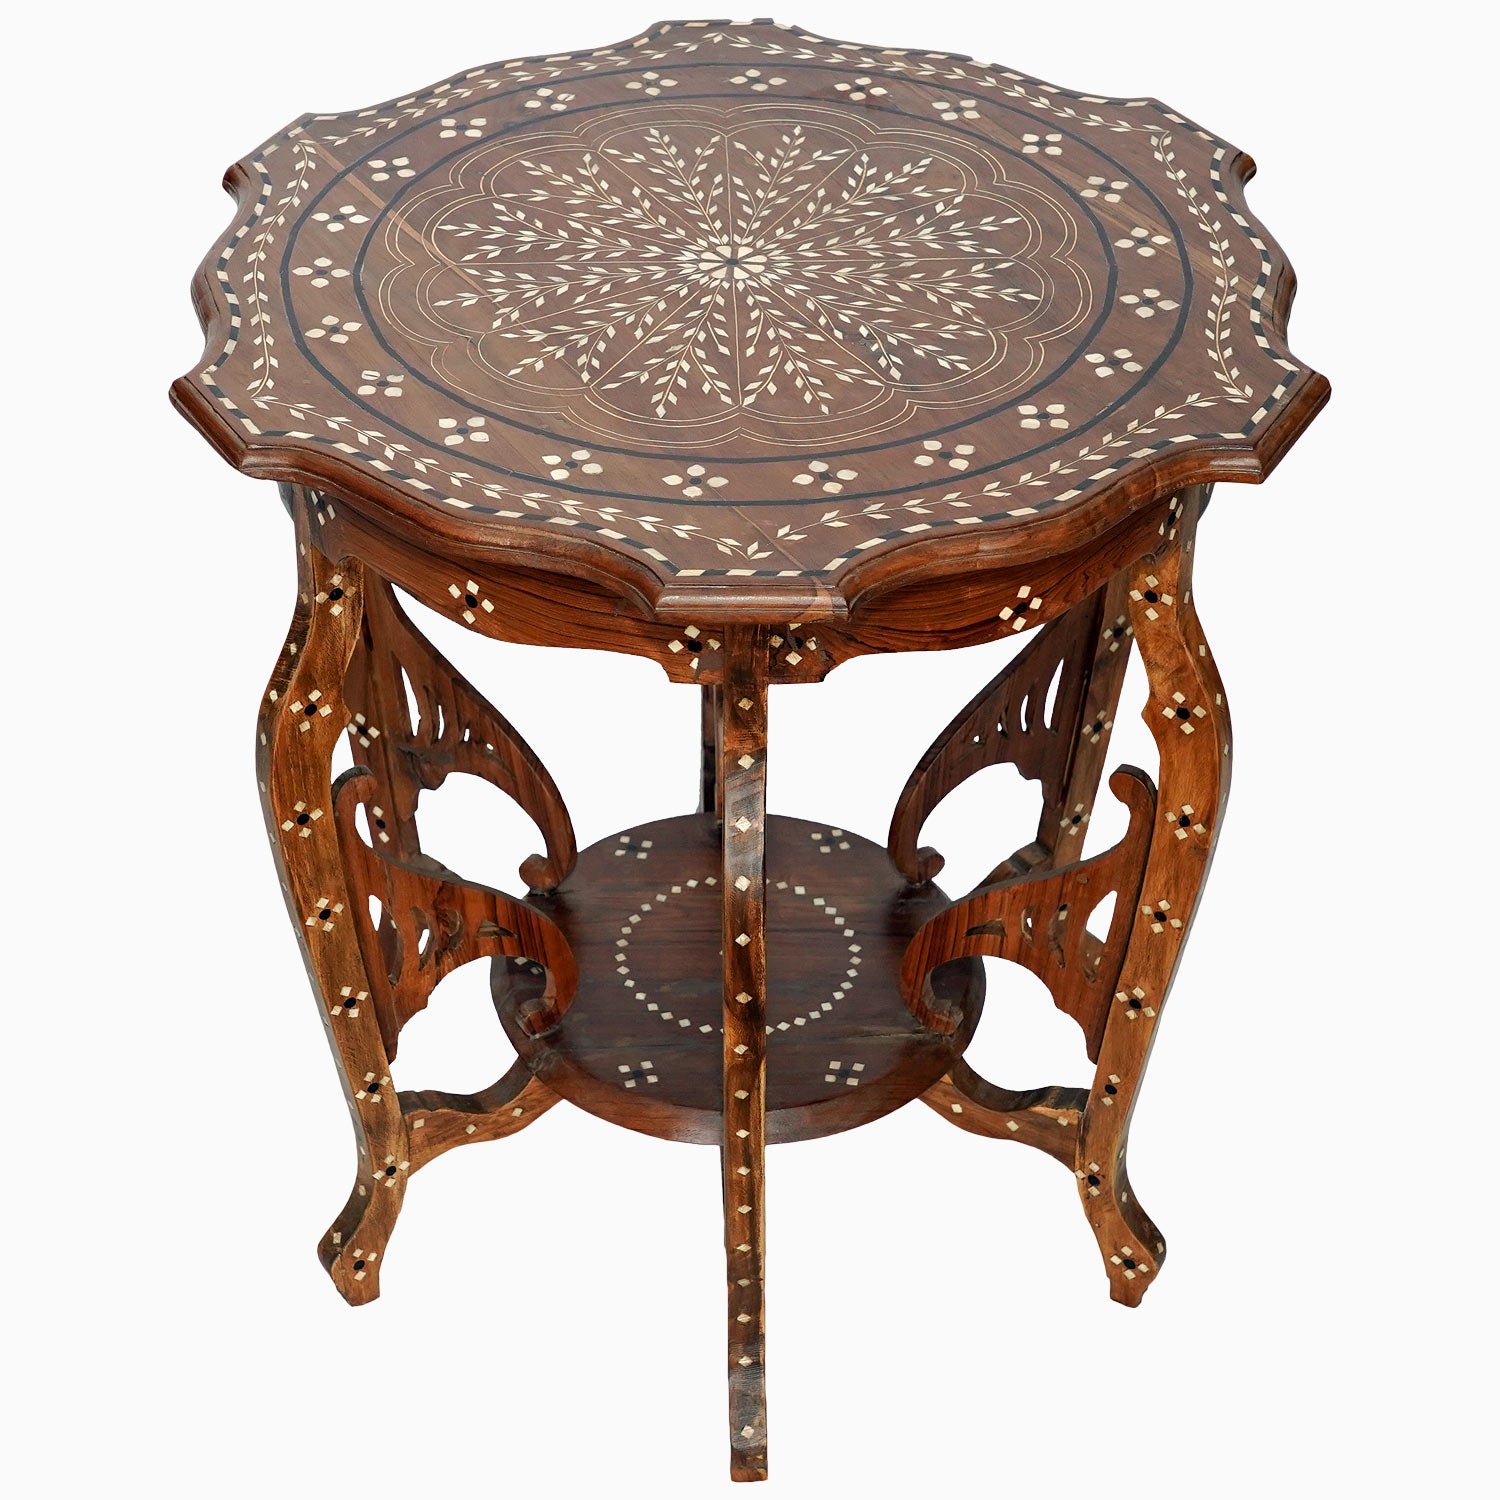 Round Wooden Inlay Table 8 Main